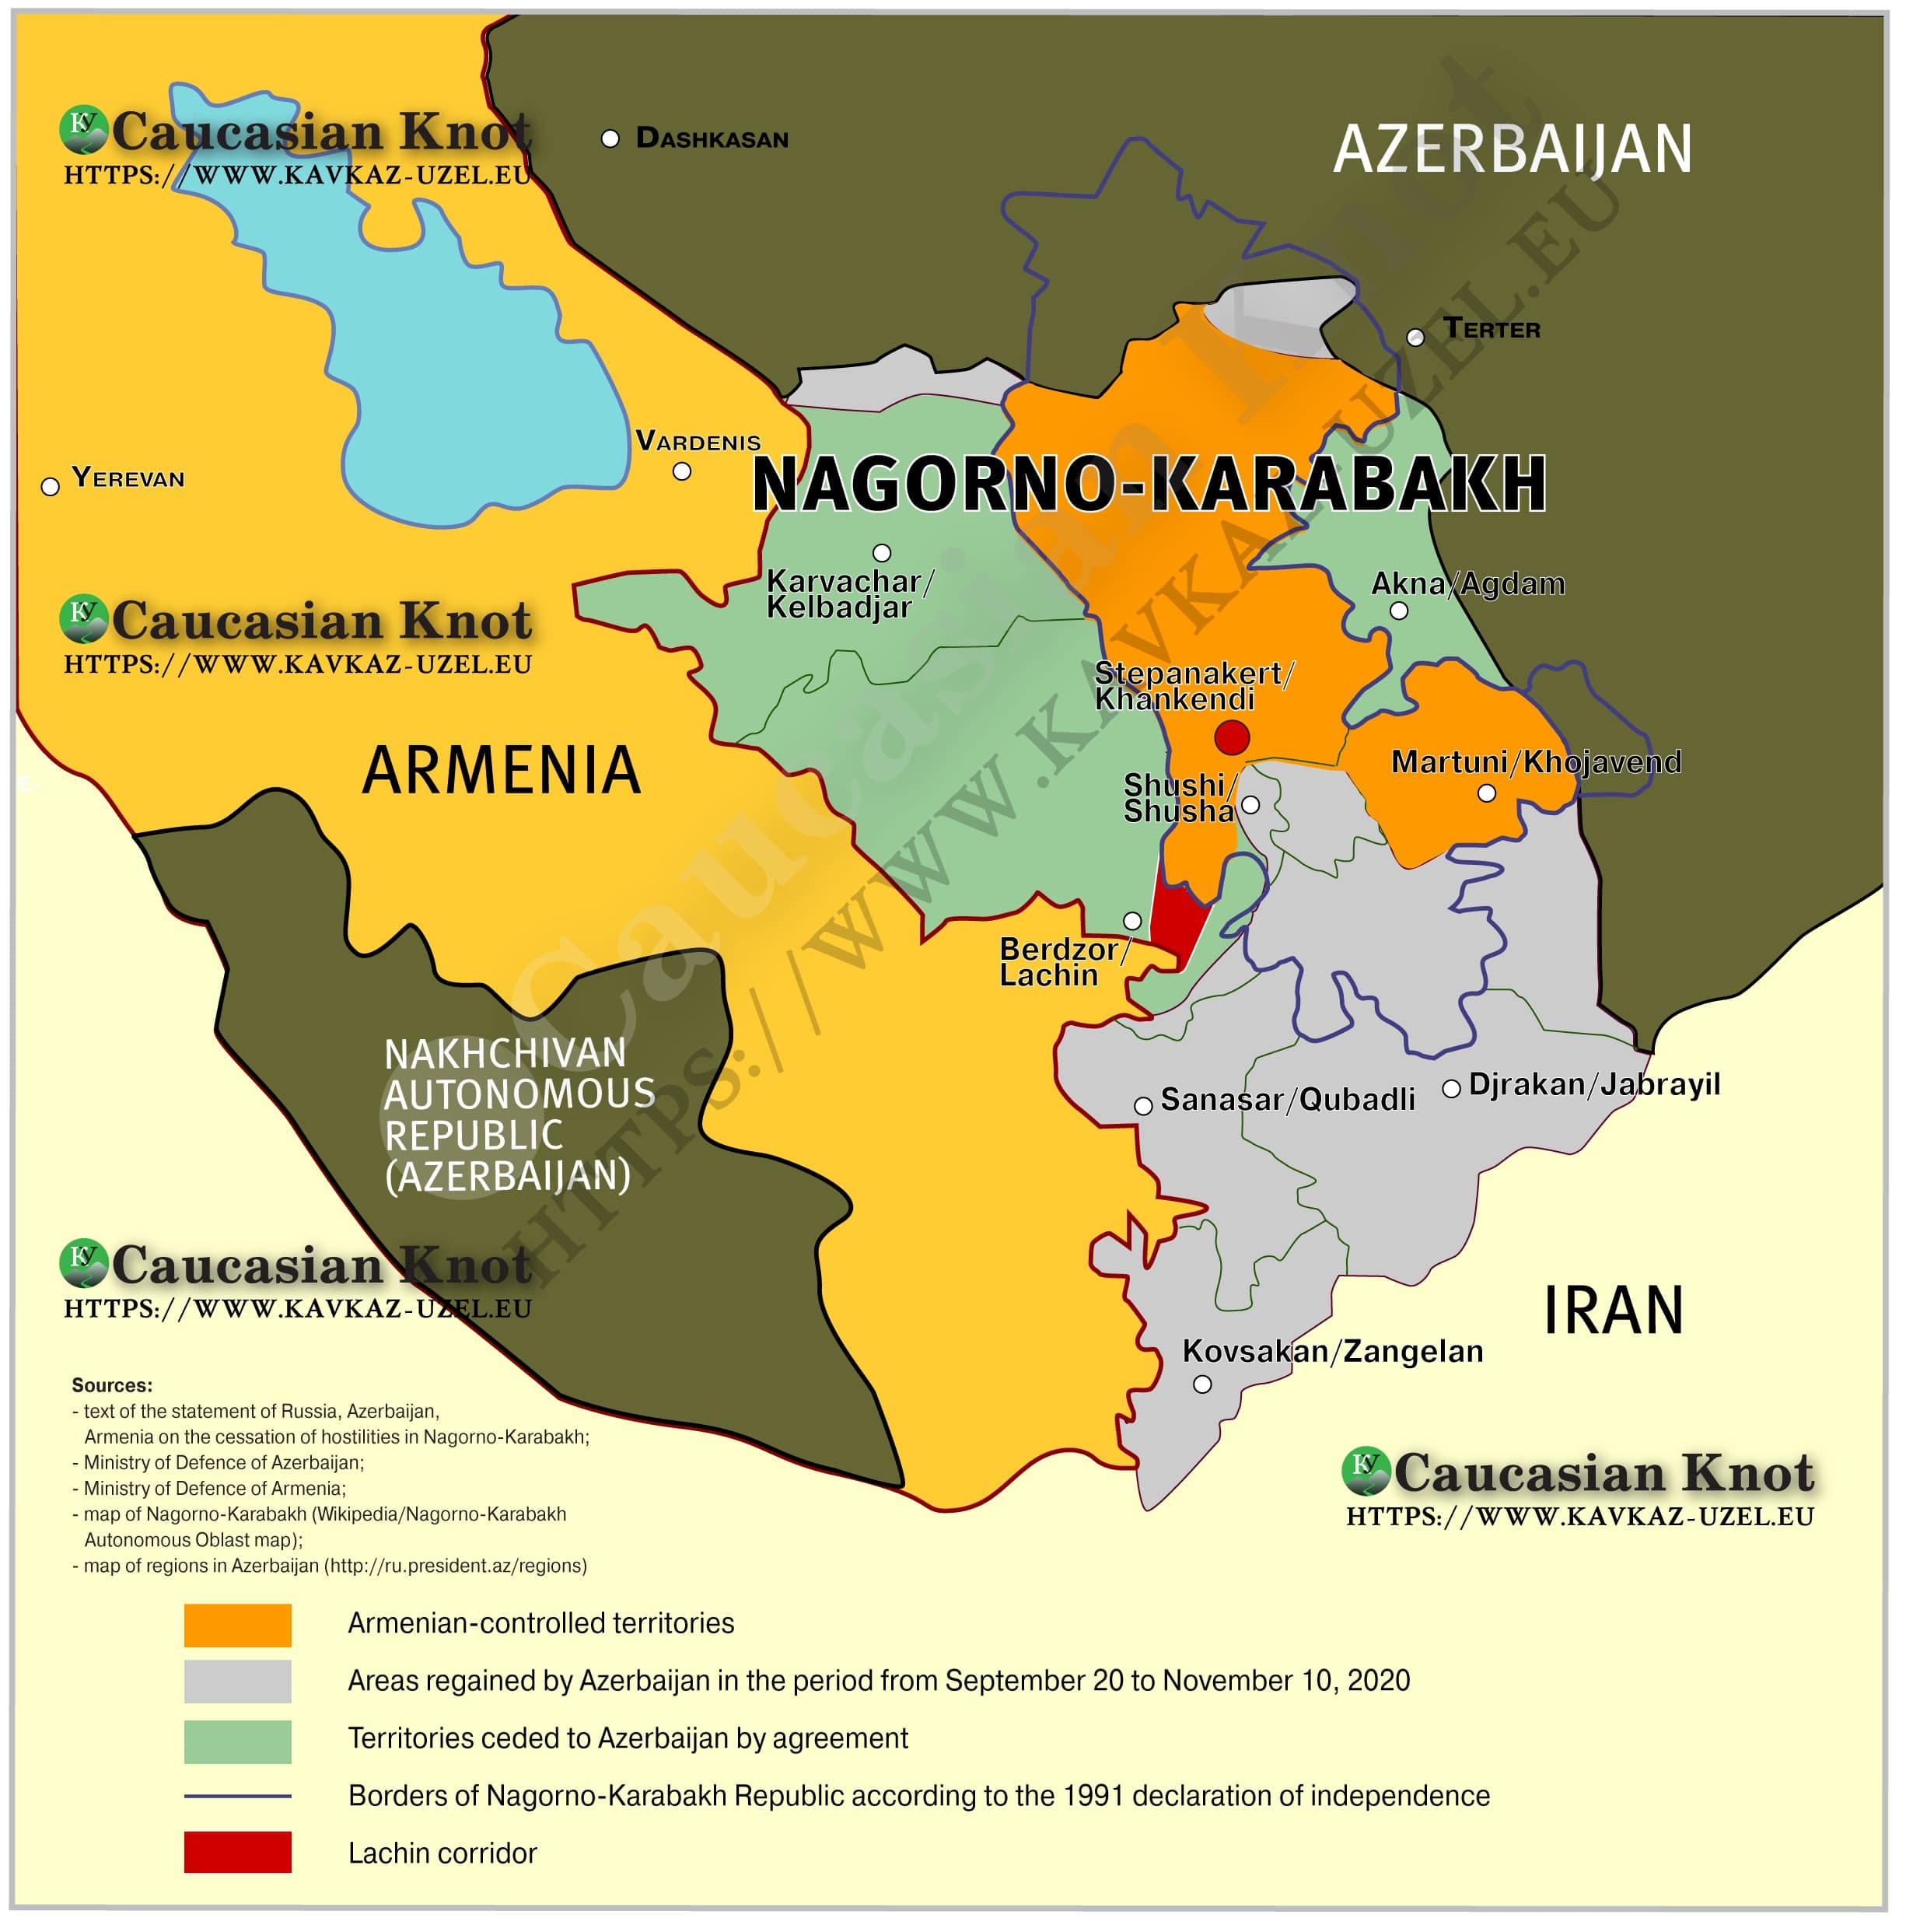 Map drawn by the Caucasian Knot based on the agreements between Armenia, Azerbaijan and Russia